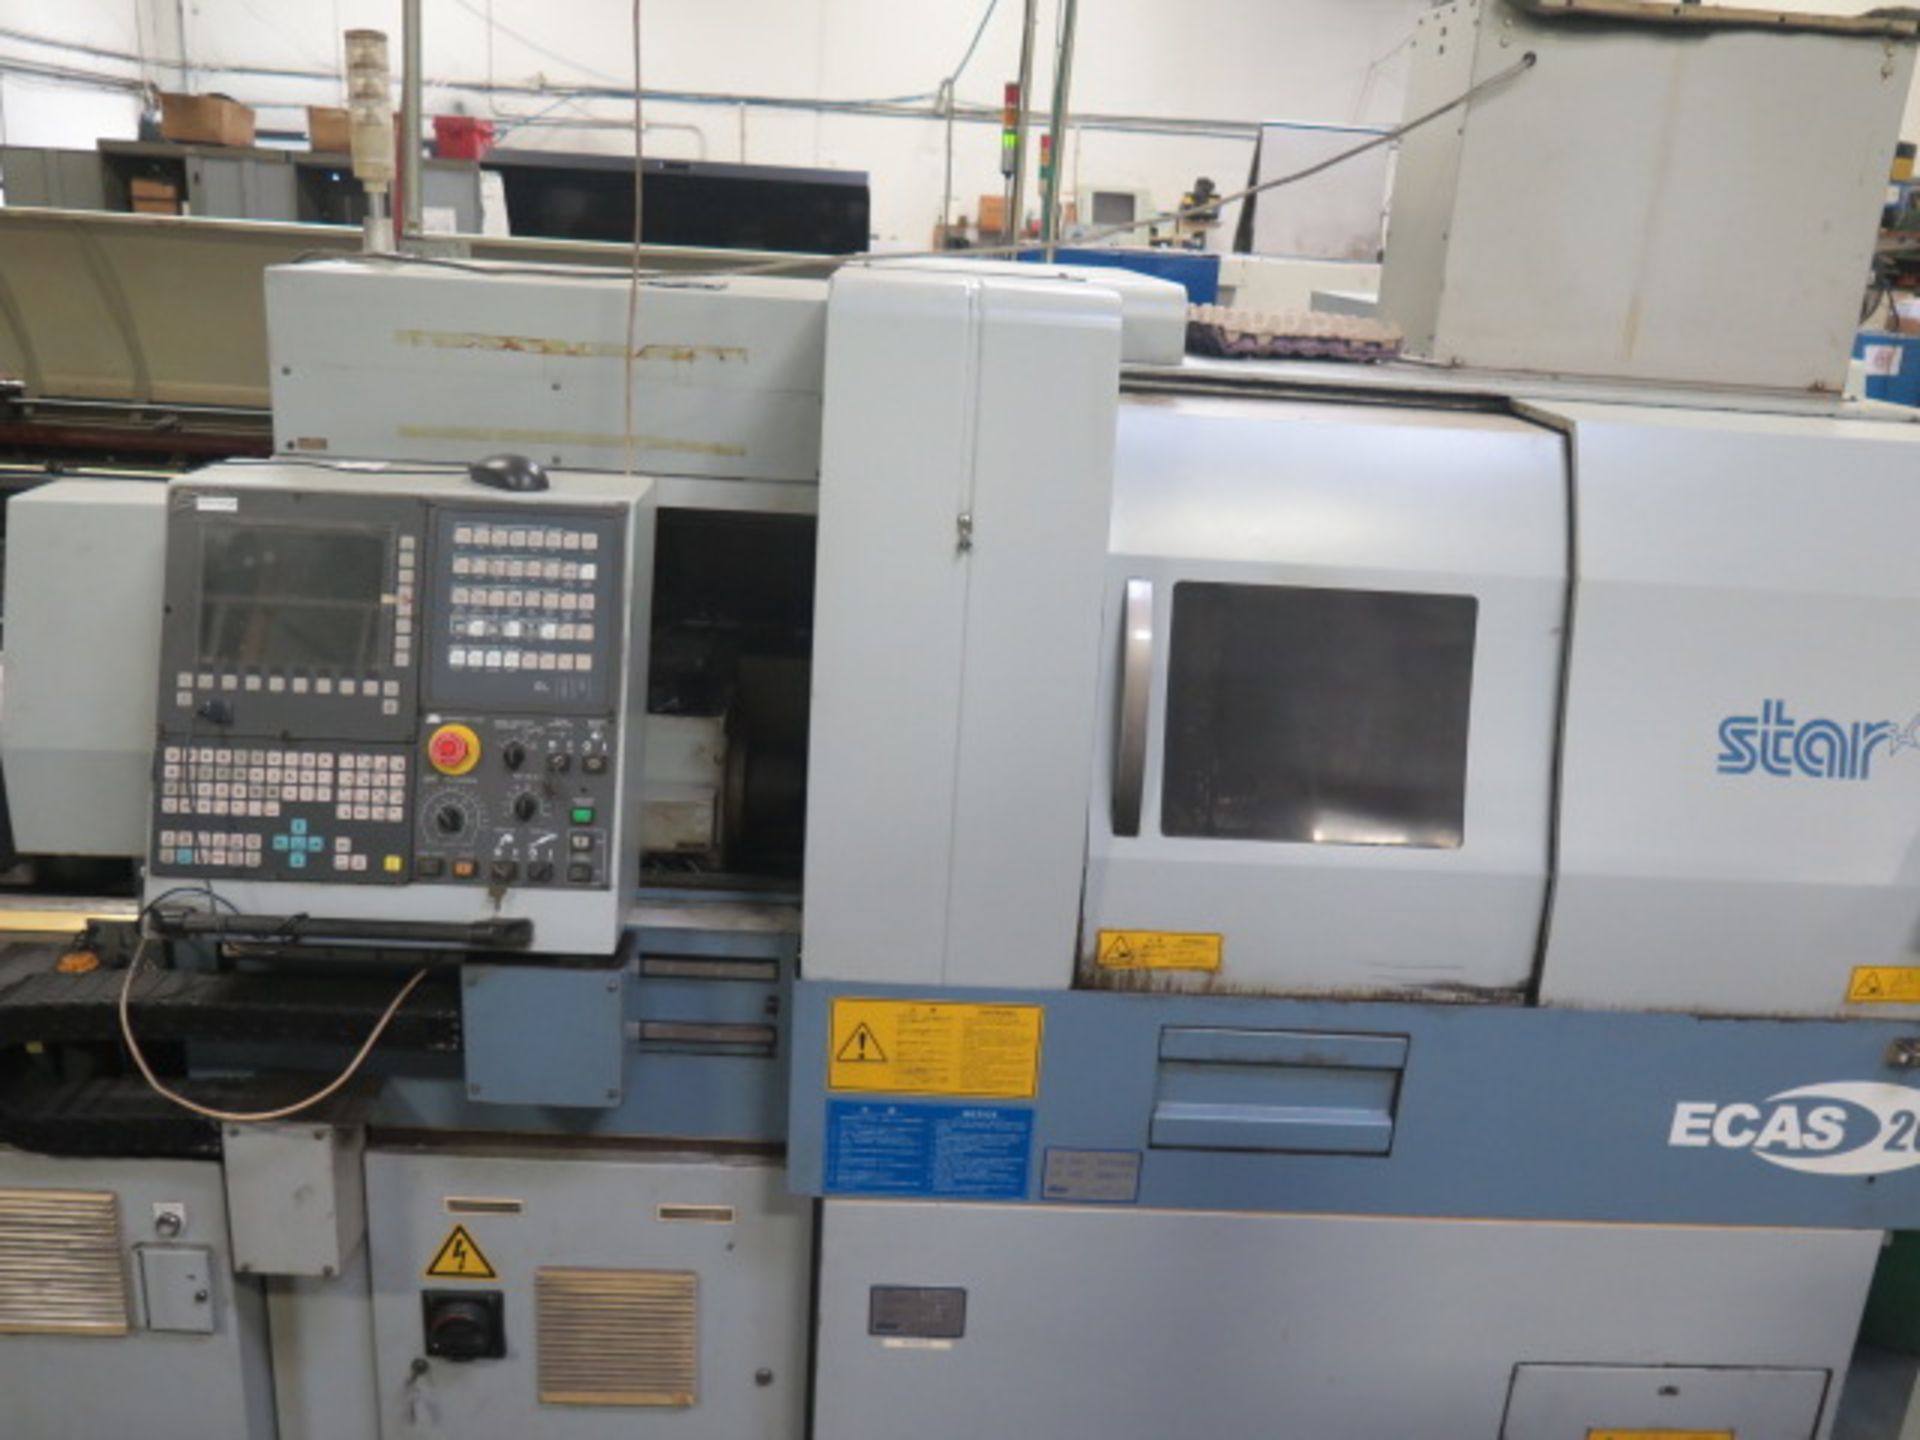 Star ECAS 20 Twin Spindle CNC Screw Machine s/n 0101(006), Siemens Controls, (6) Turning/ SOLD AS IS - Image 2 of 12